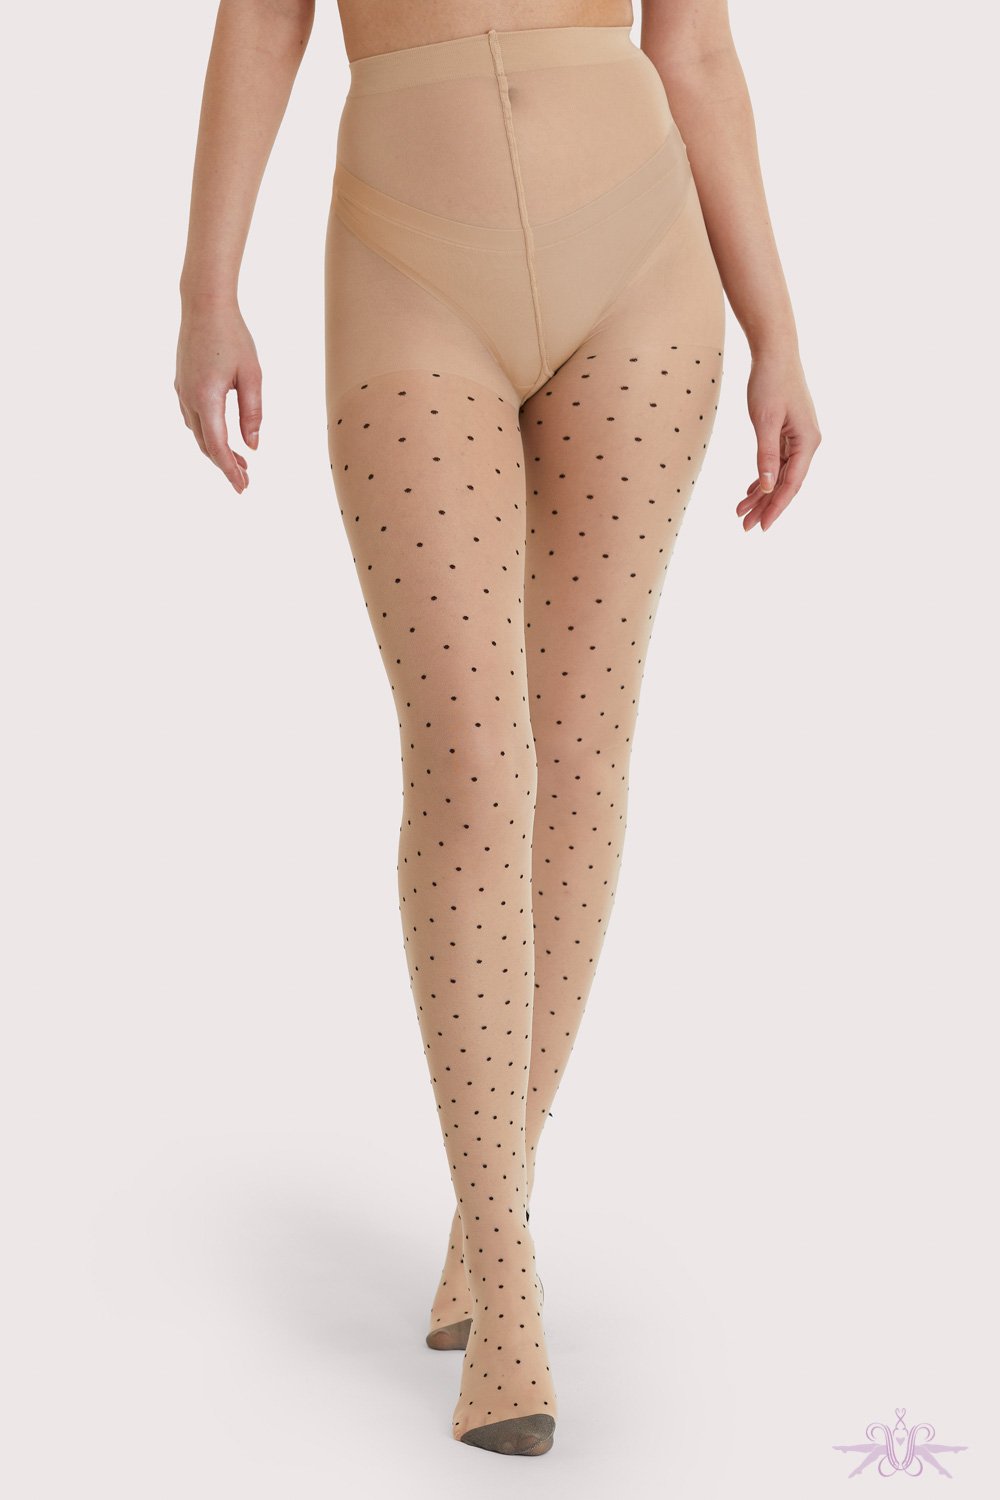 Playful Promises Dotty Seamed Tights with Bow